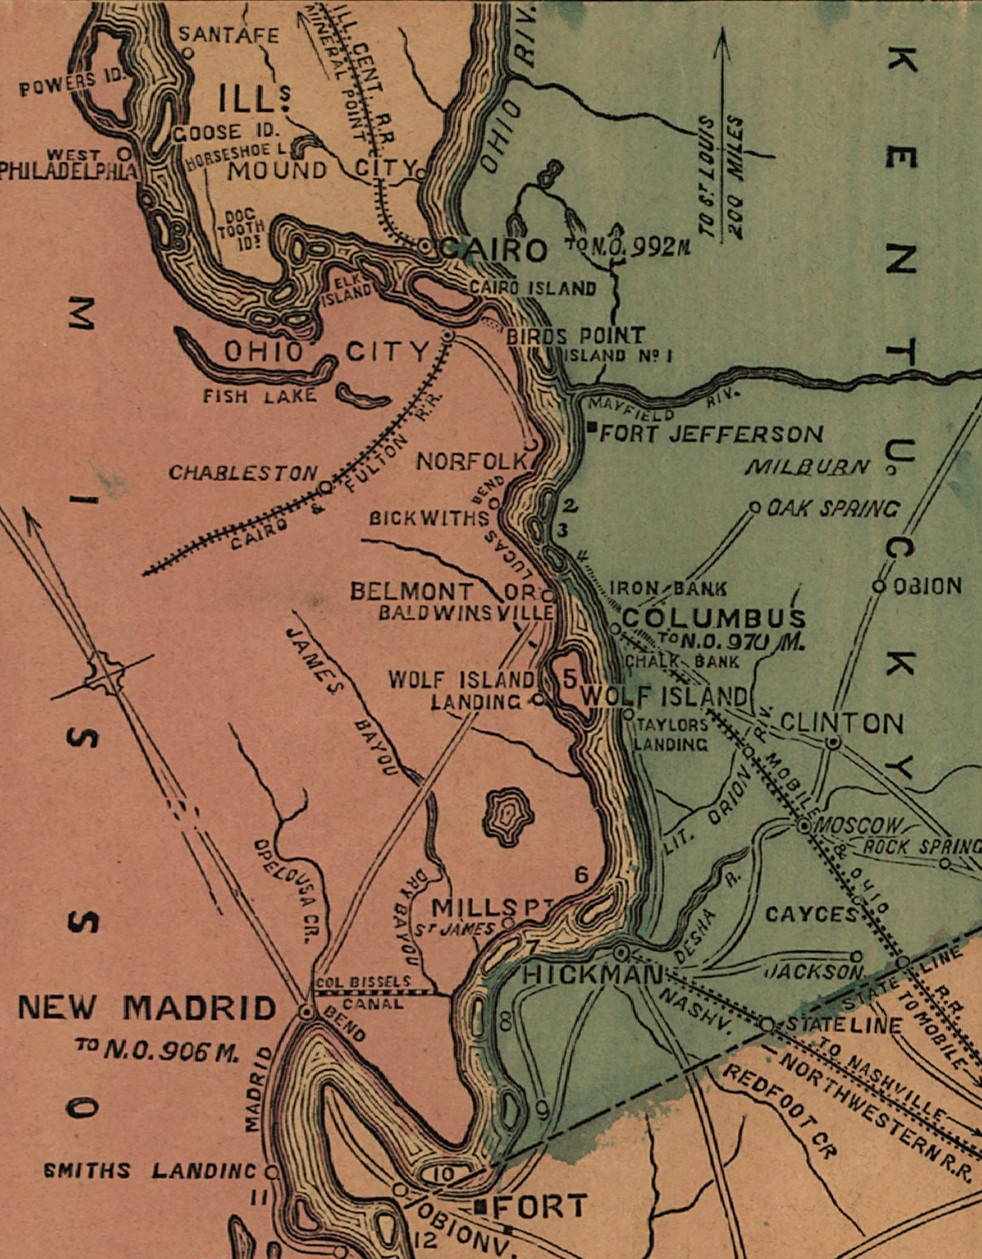 Color tinted map of a river valley. 